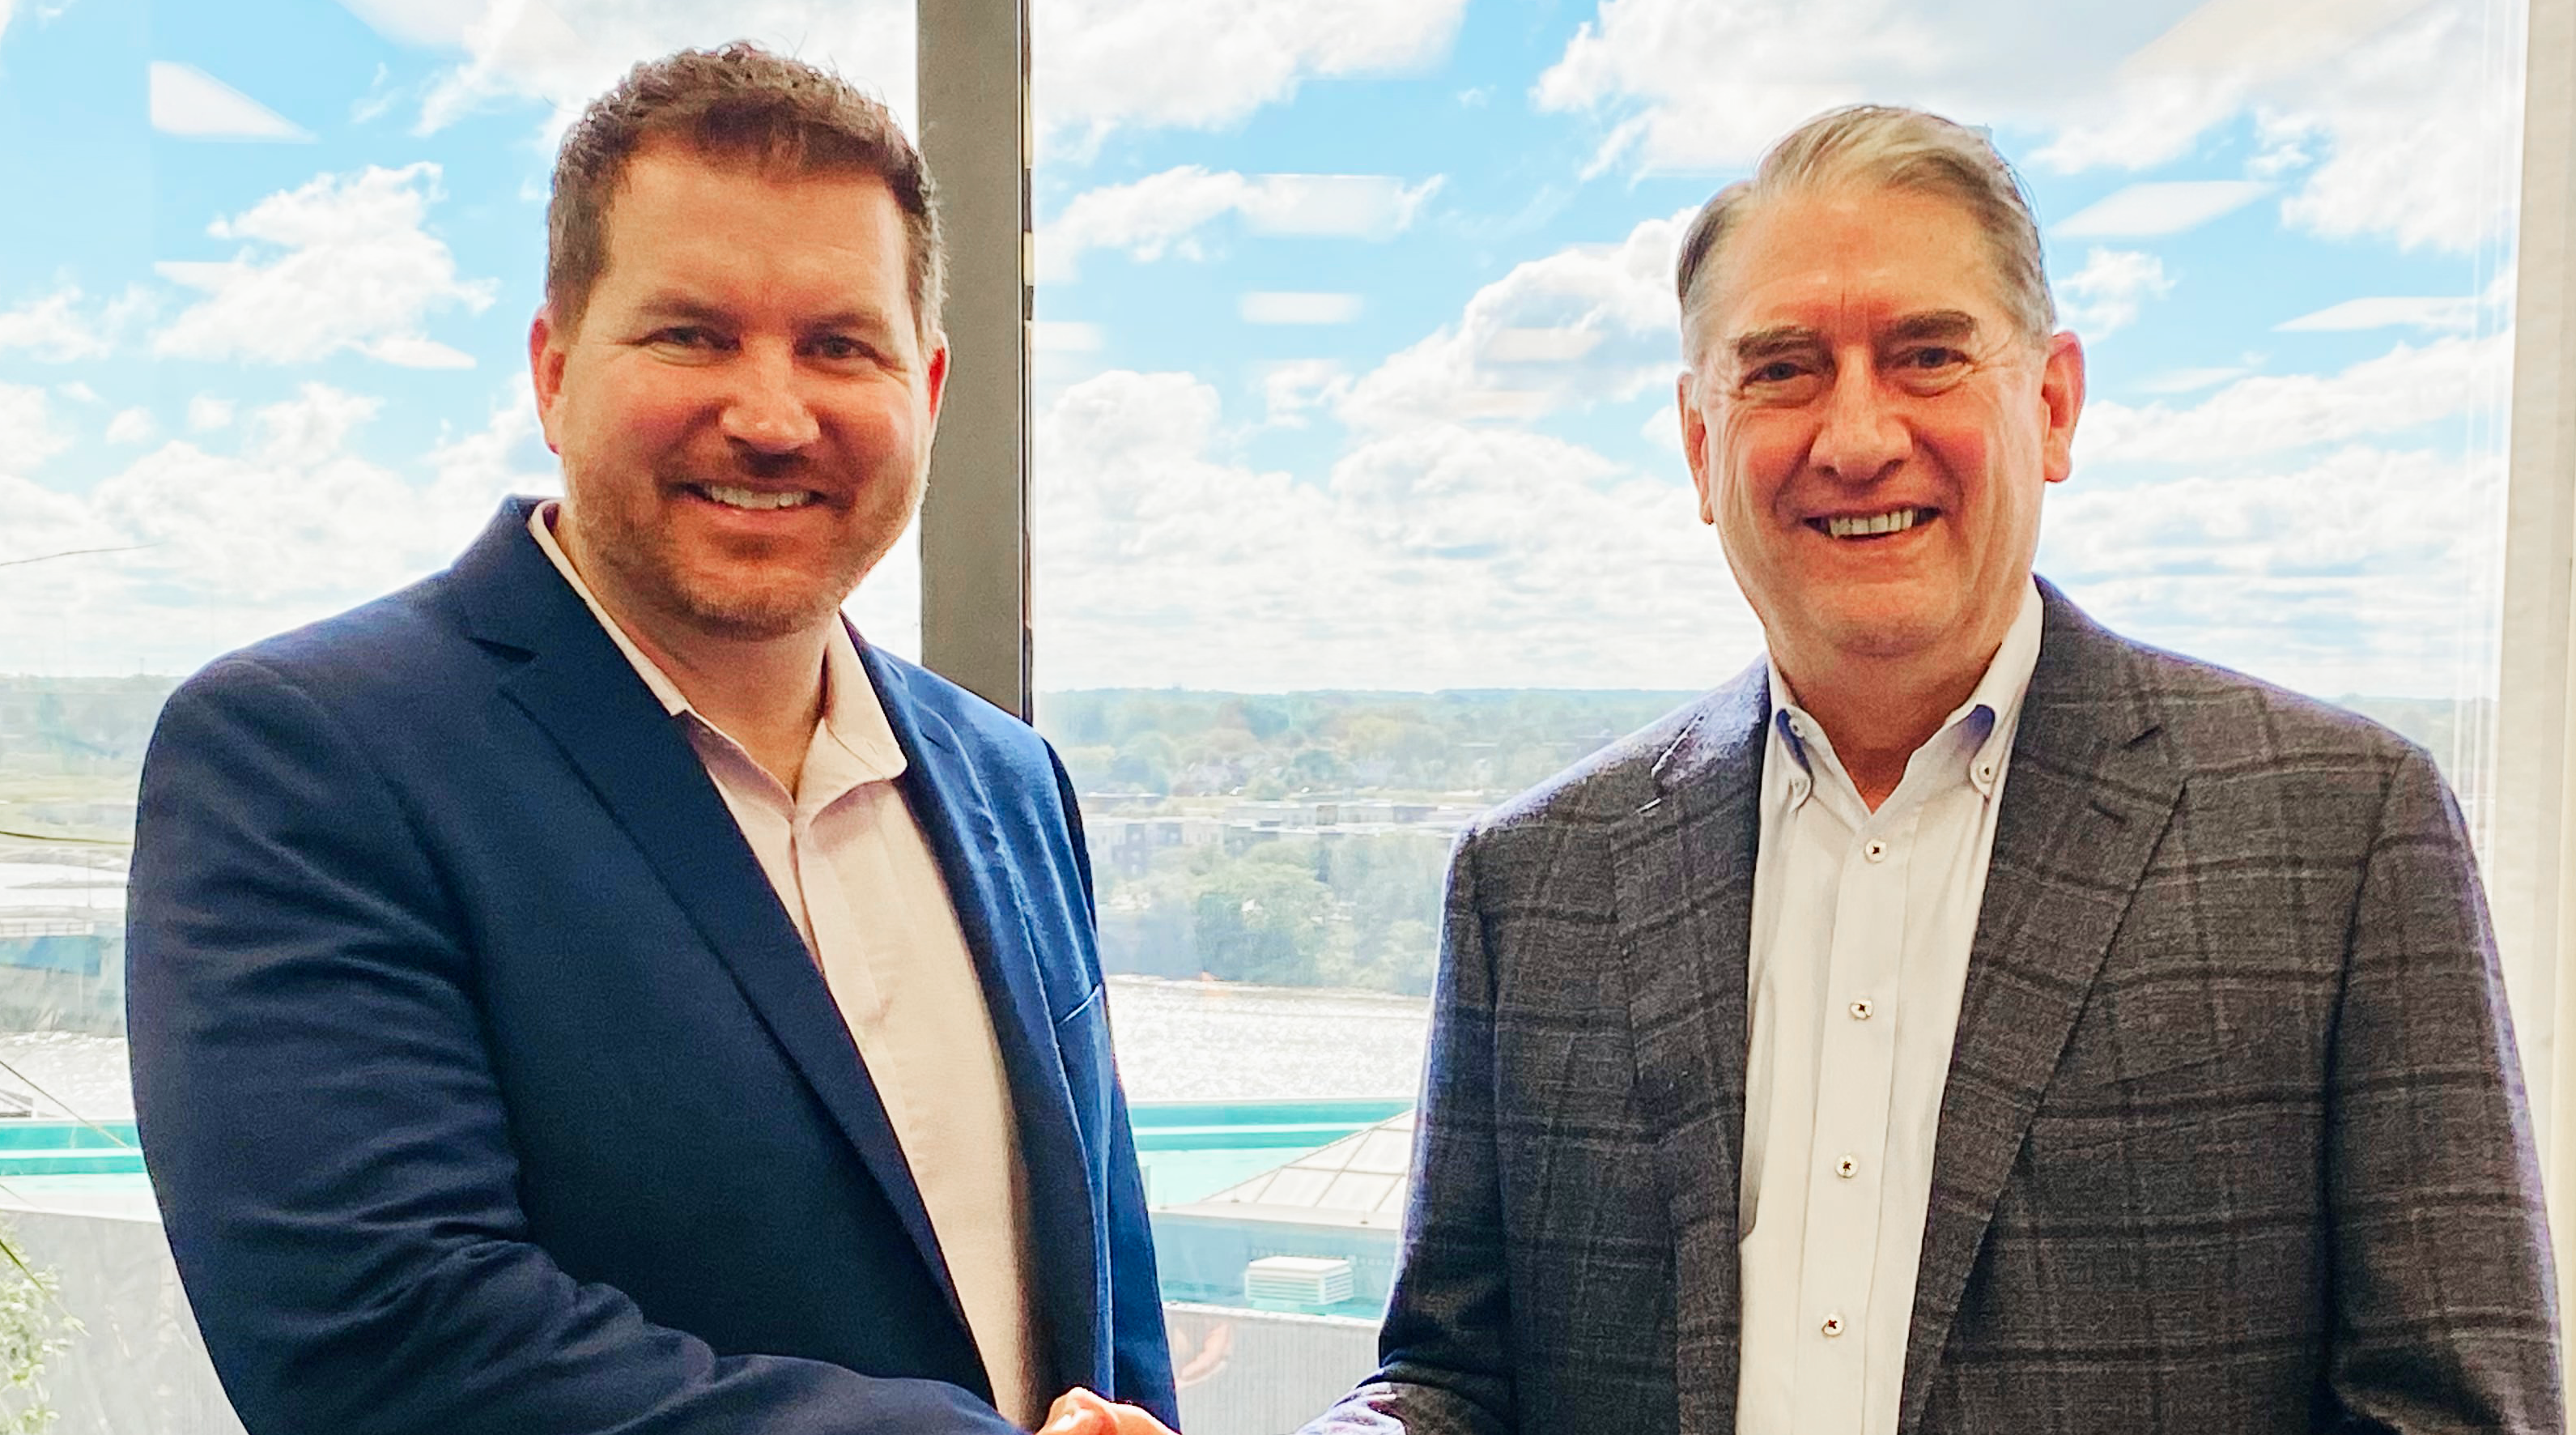 Opteon is uniting Apex and The William Fall Group to push forward innovation and technology within the U.S. appraisal industry